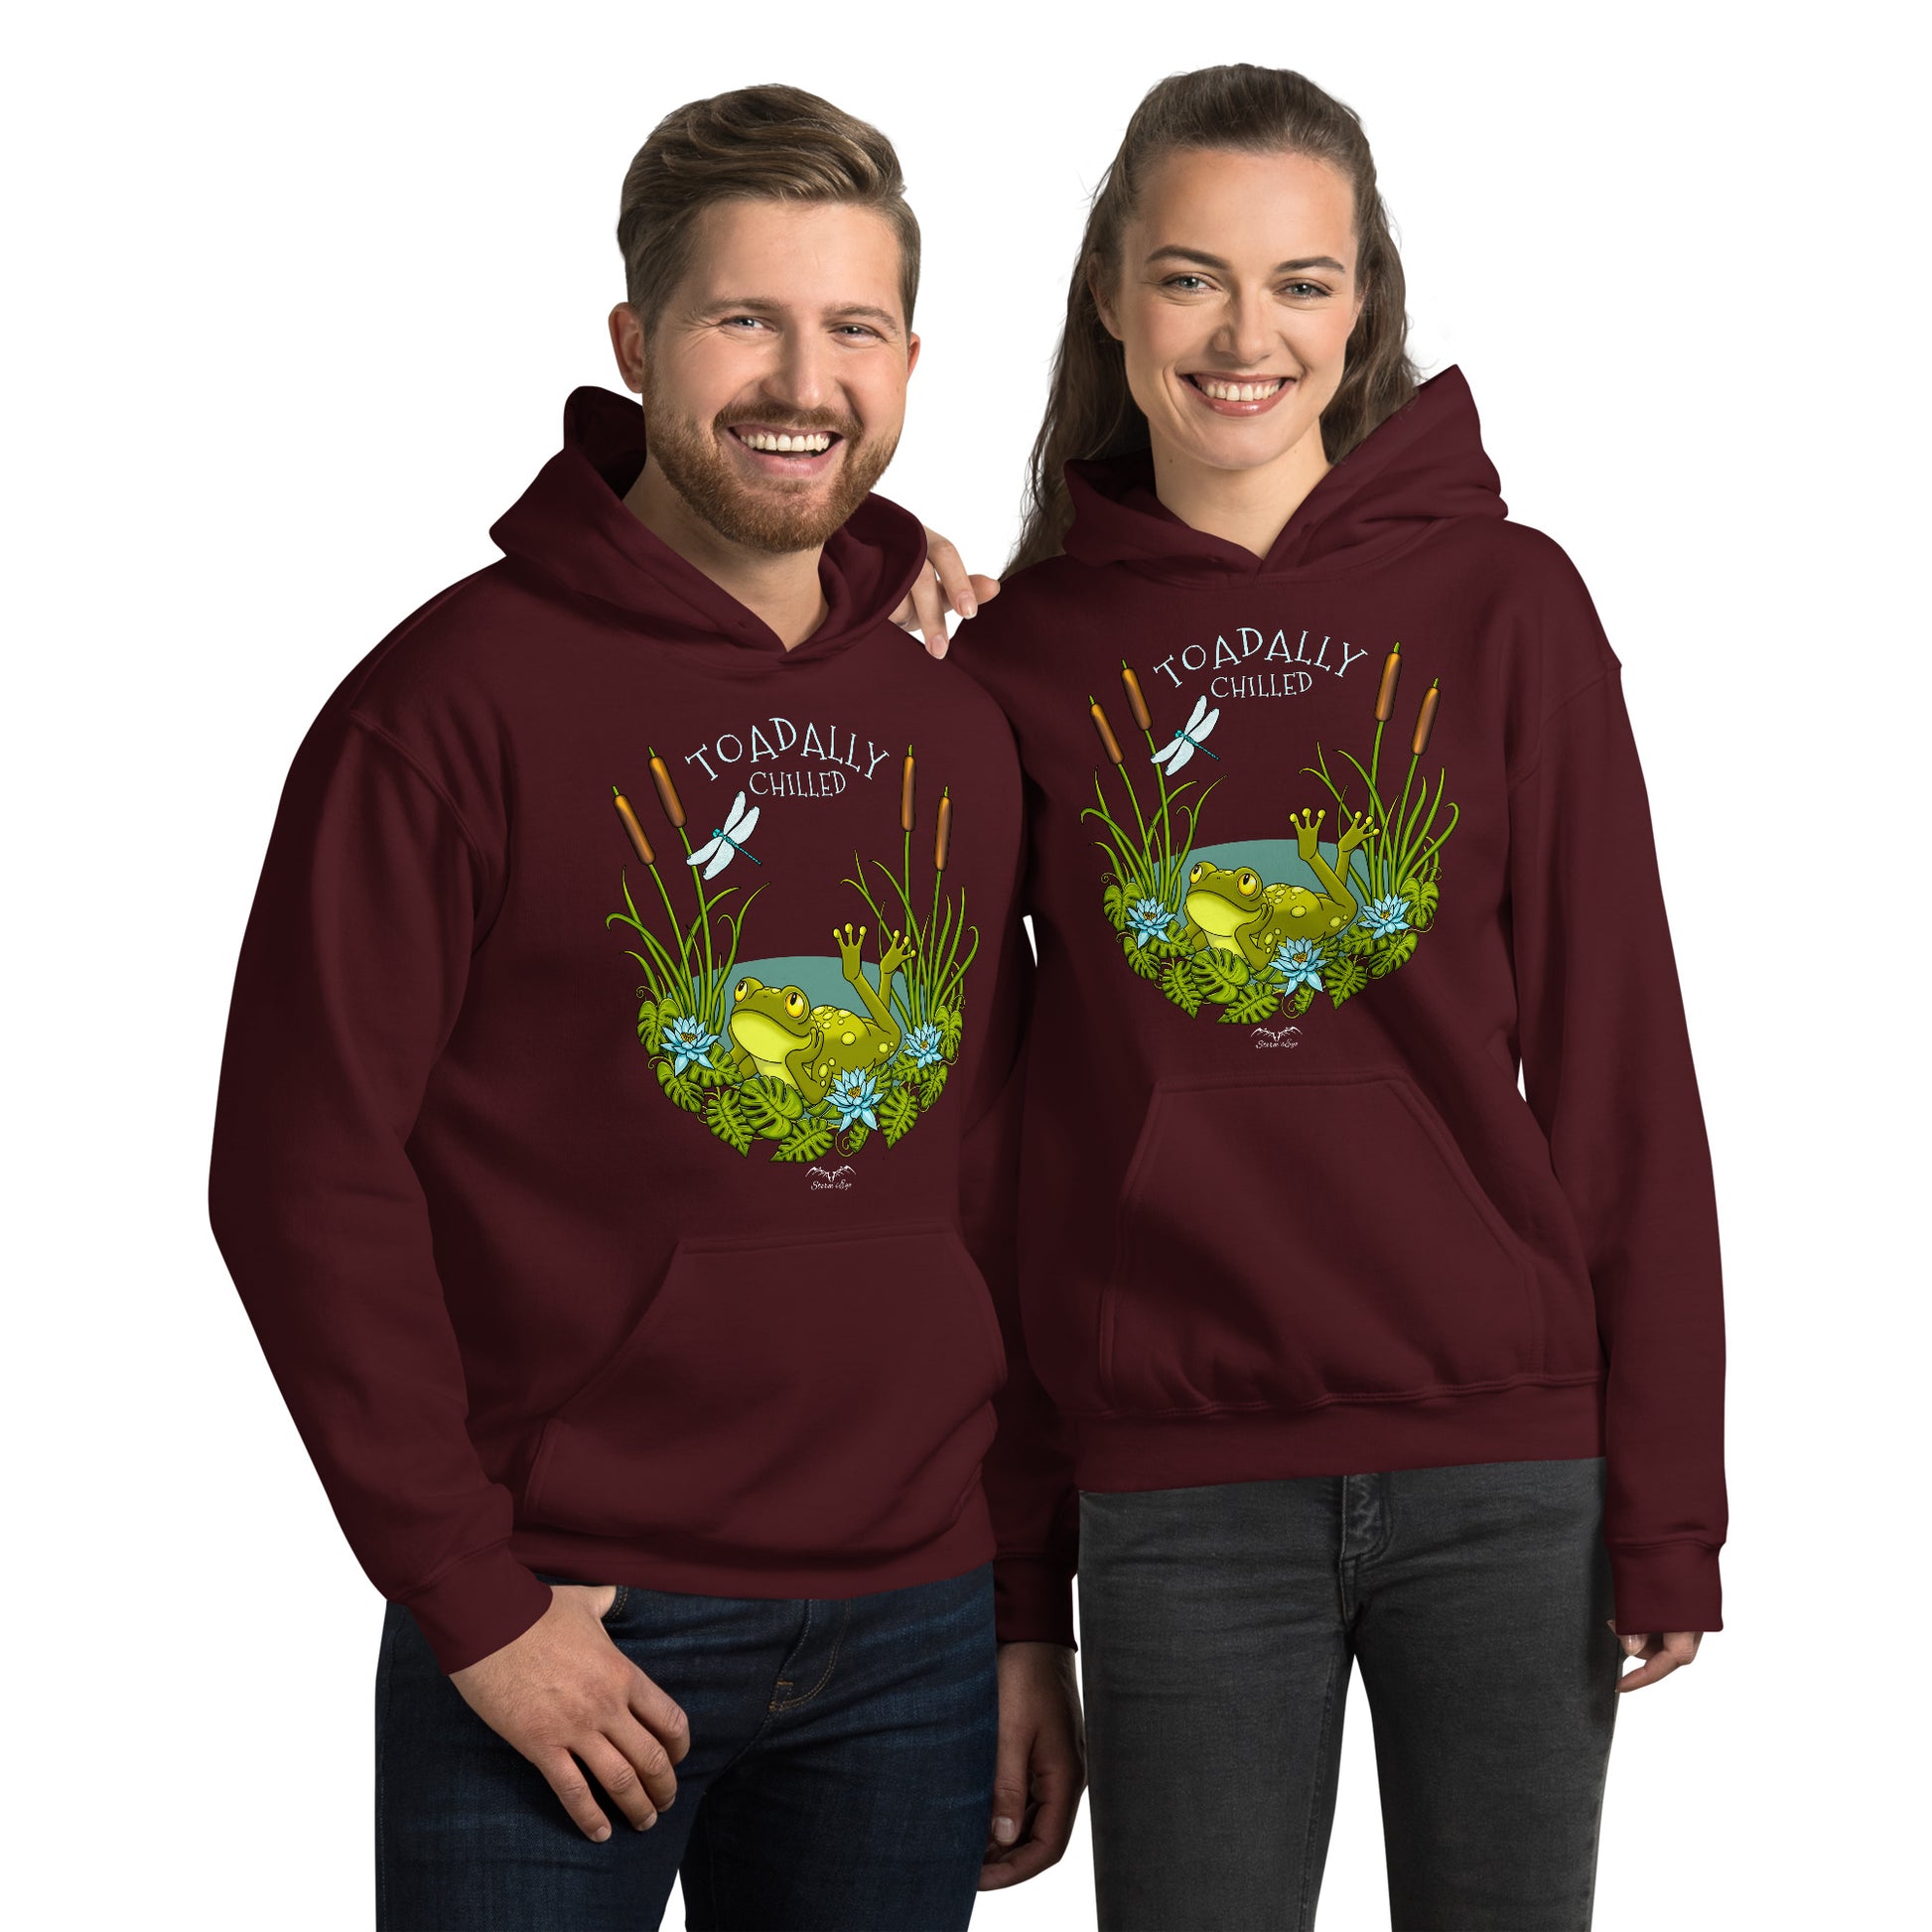 stormseye design toadally chilled hoodie modelled view maroon